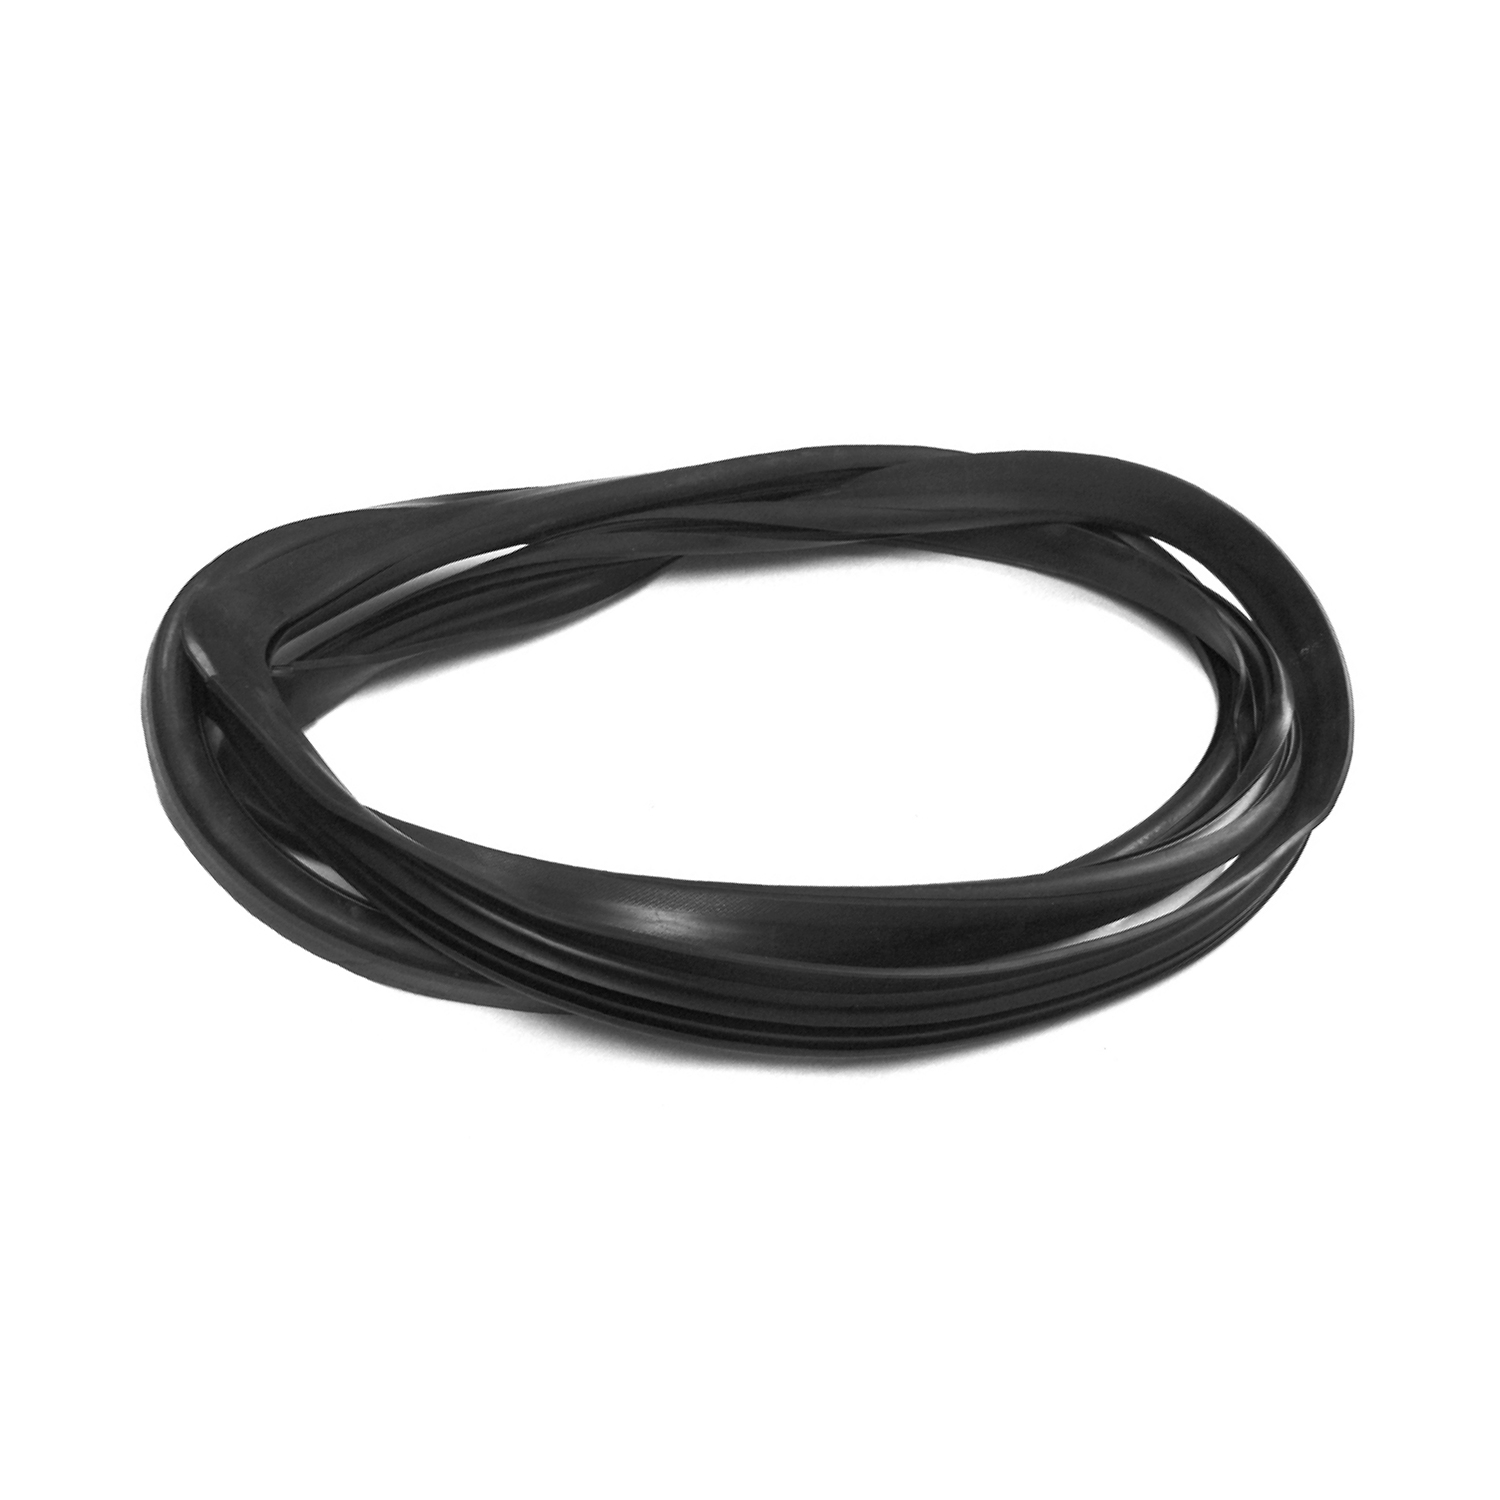 1984 Plymouth Voyager Windshield seal, '71-'93 Dodge/Plymouth B/PB series vans-VWS 2706